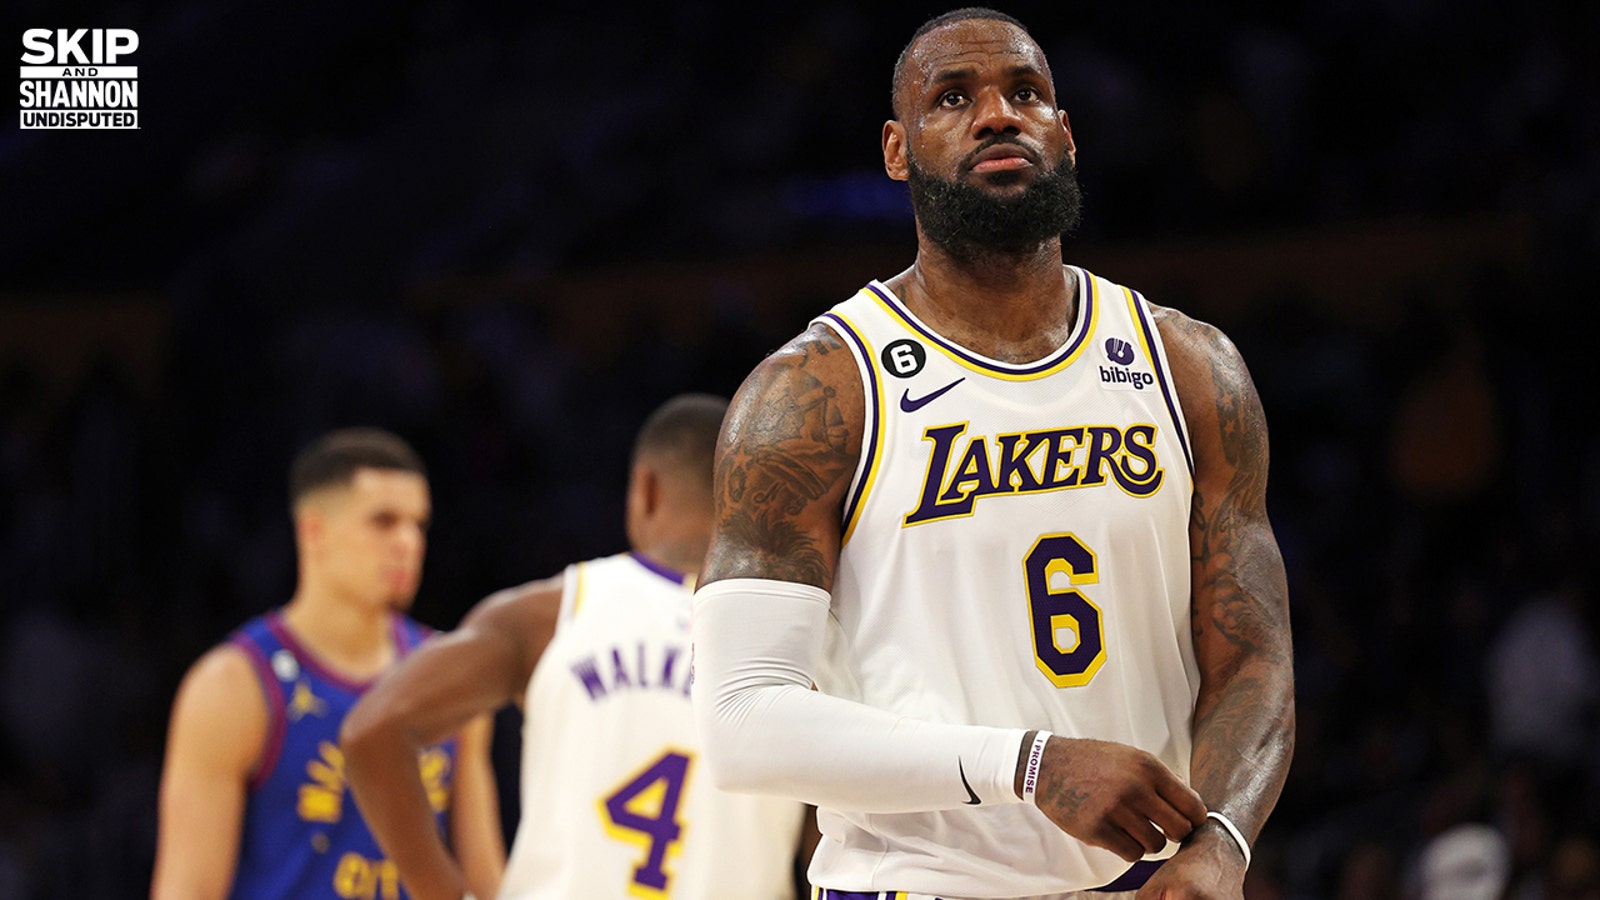 Lakers are on the brink of elimination in the Western Conference Finals.